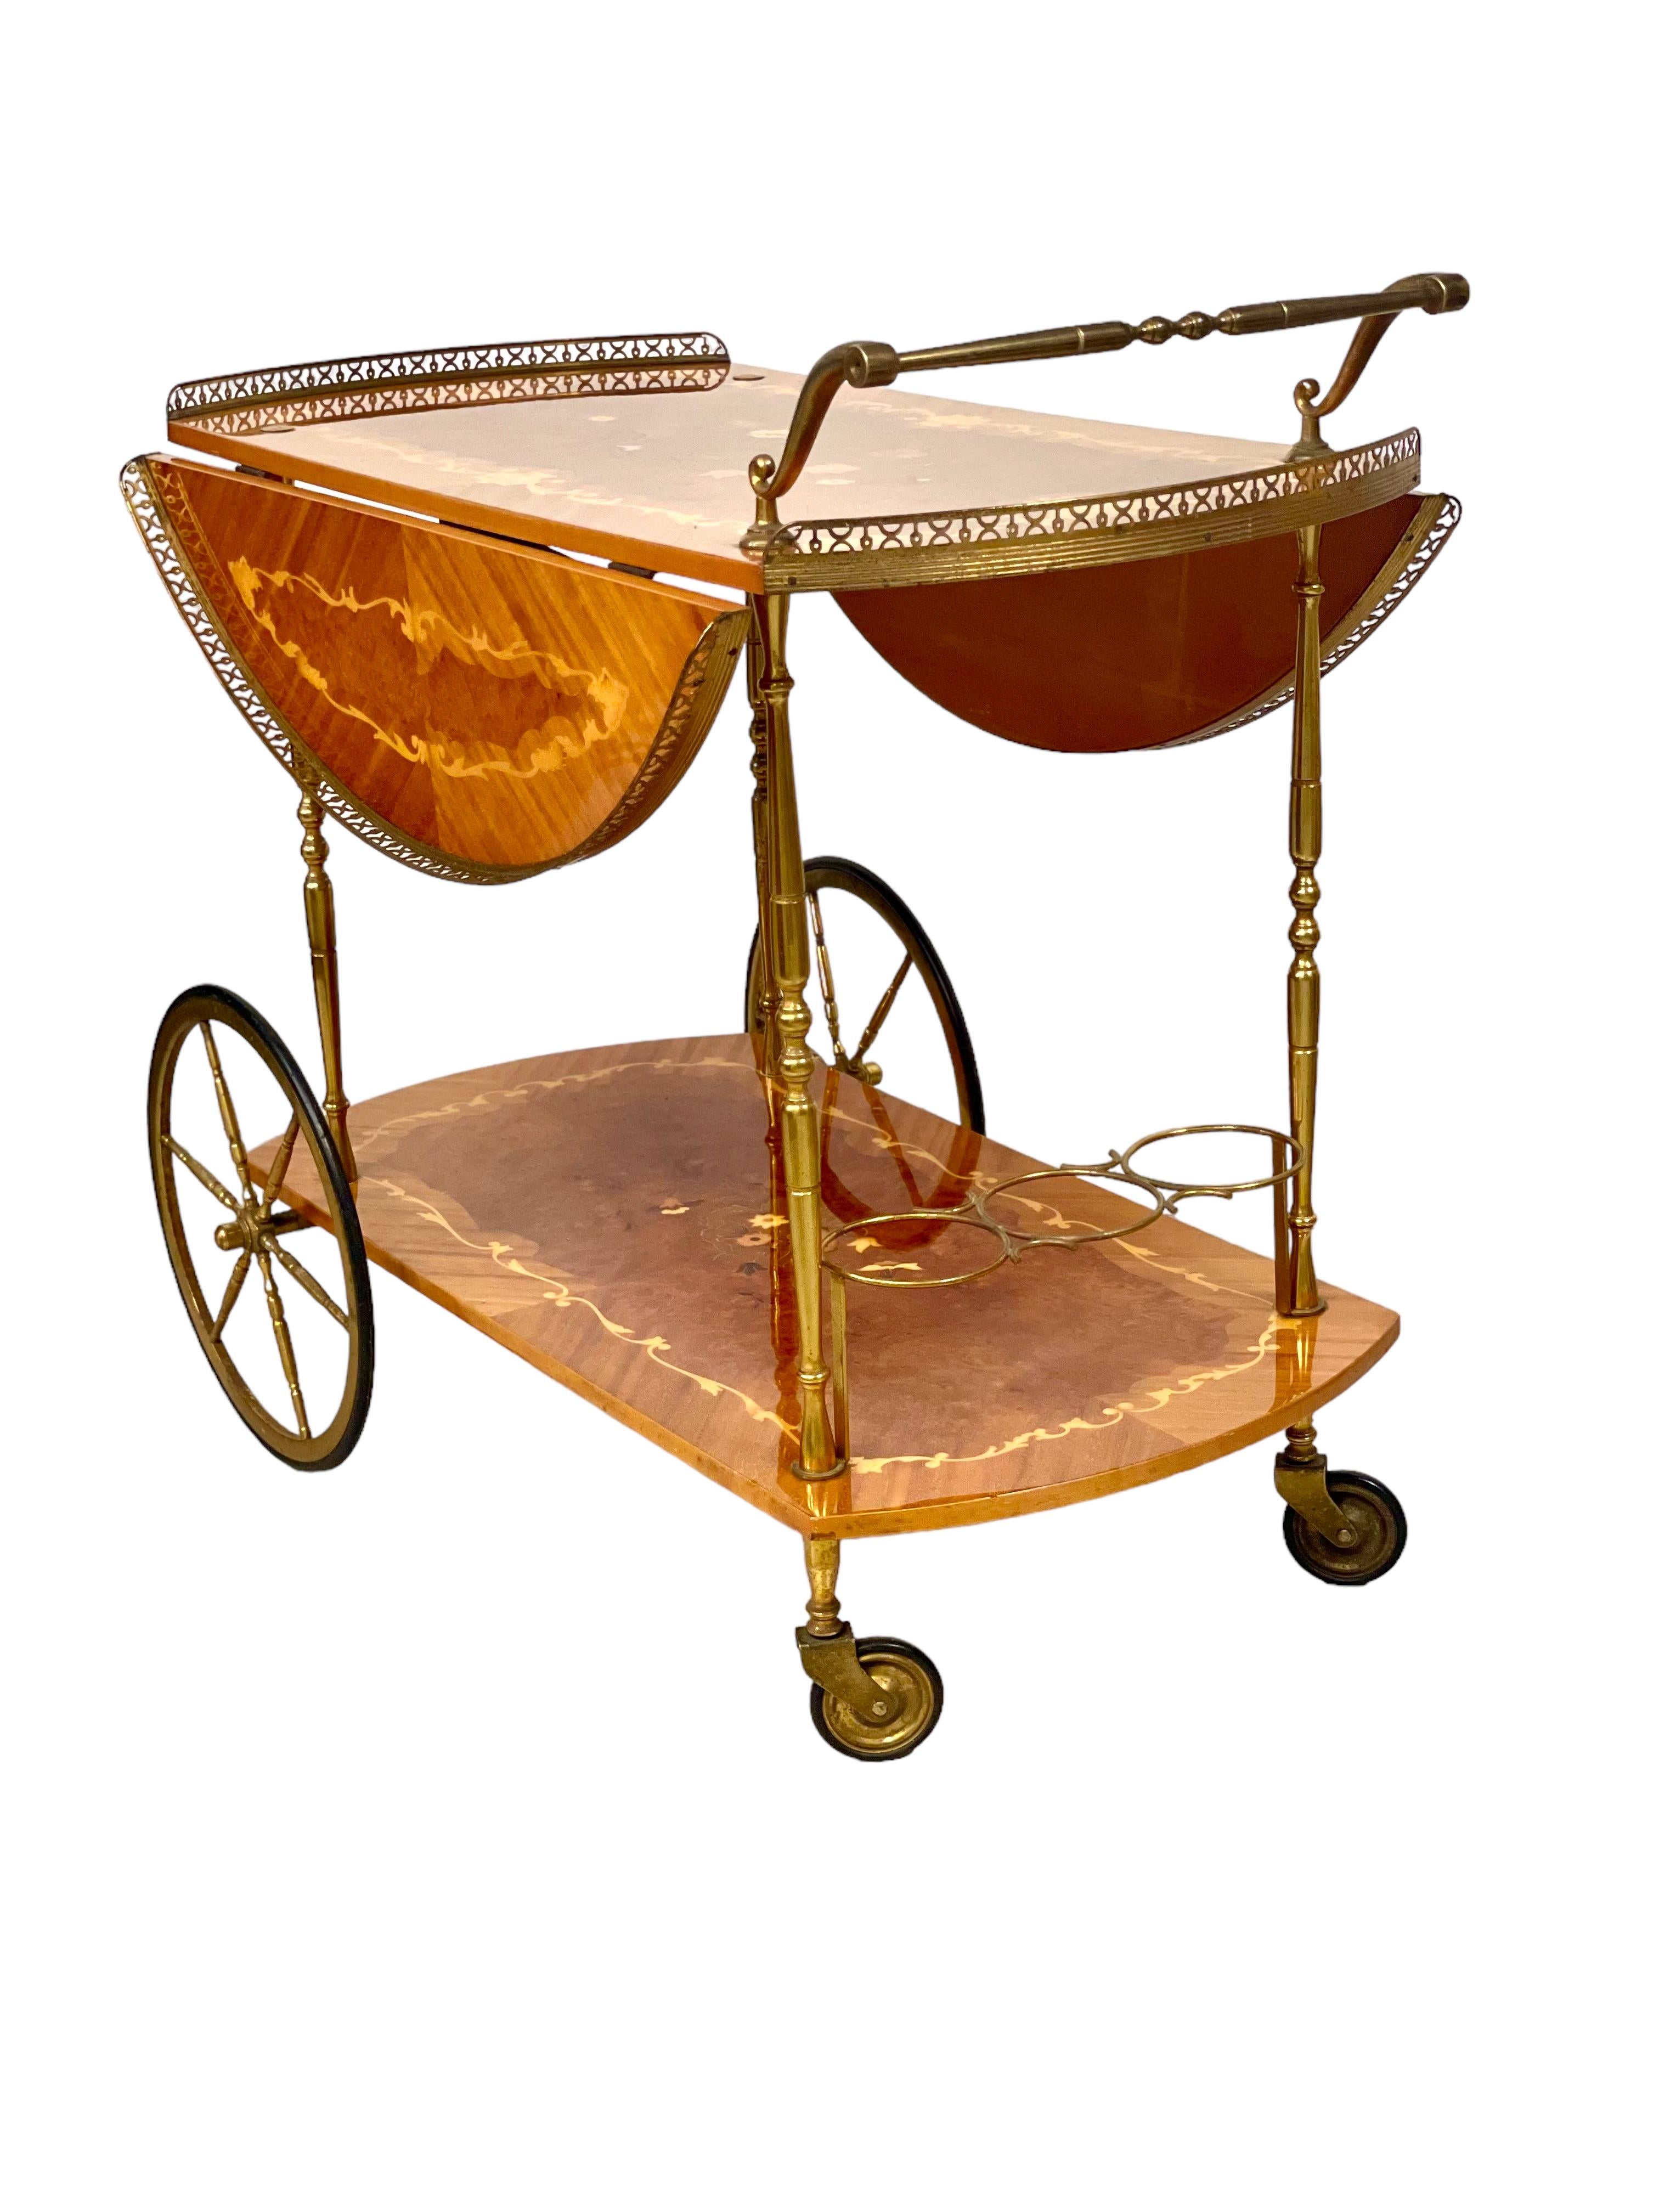 A very stylish mid-century Italian drop-leaf bar cart, or drinks trolley, beautifully decorated with fine quality floral marquetry in a variety of lovely wood. Featuring two tiers, the lower one fitted with three useful bottle holders, the cart is